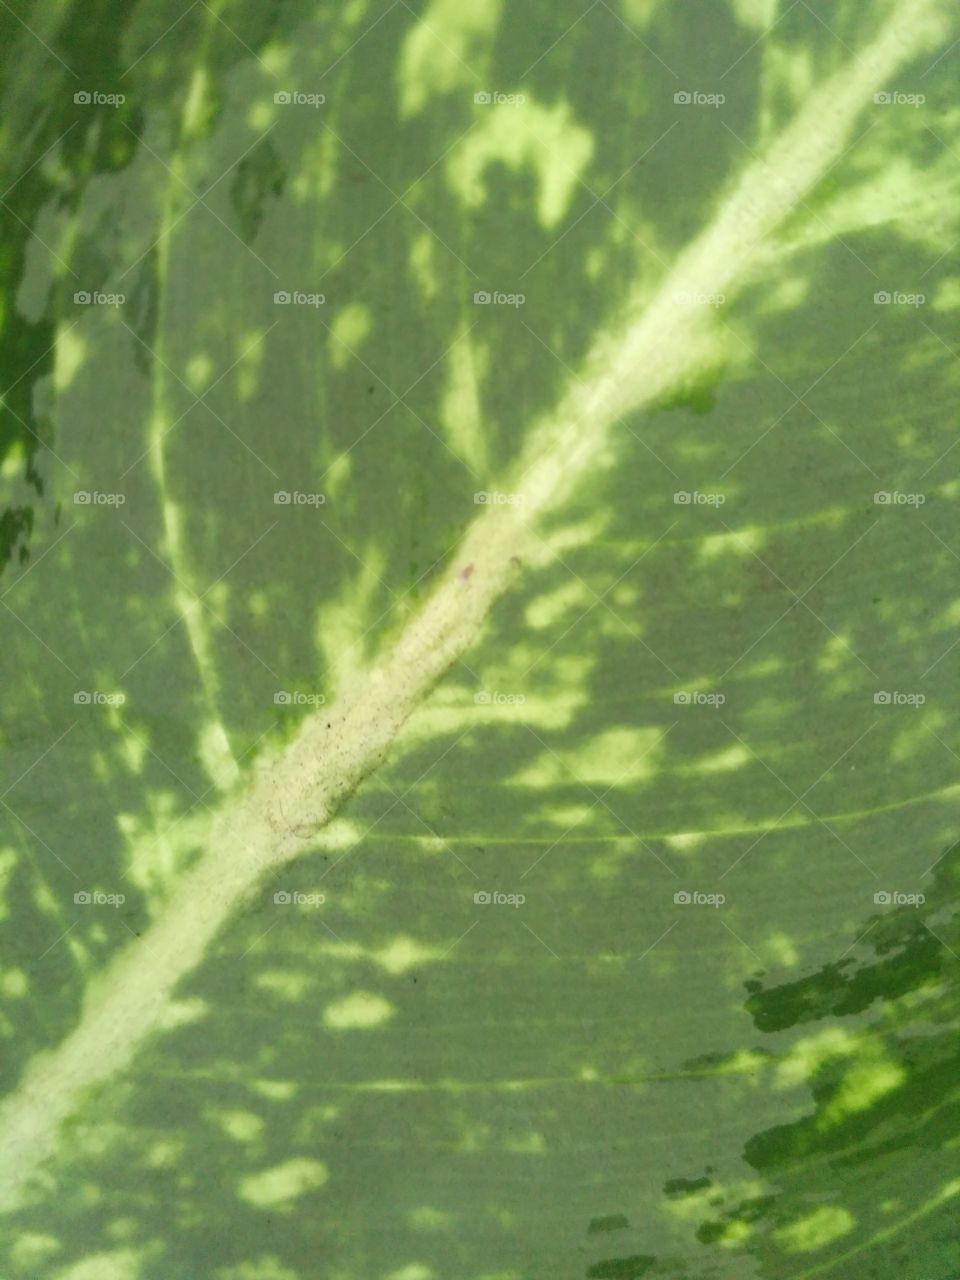 Texture photograpy of green leaf